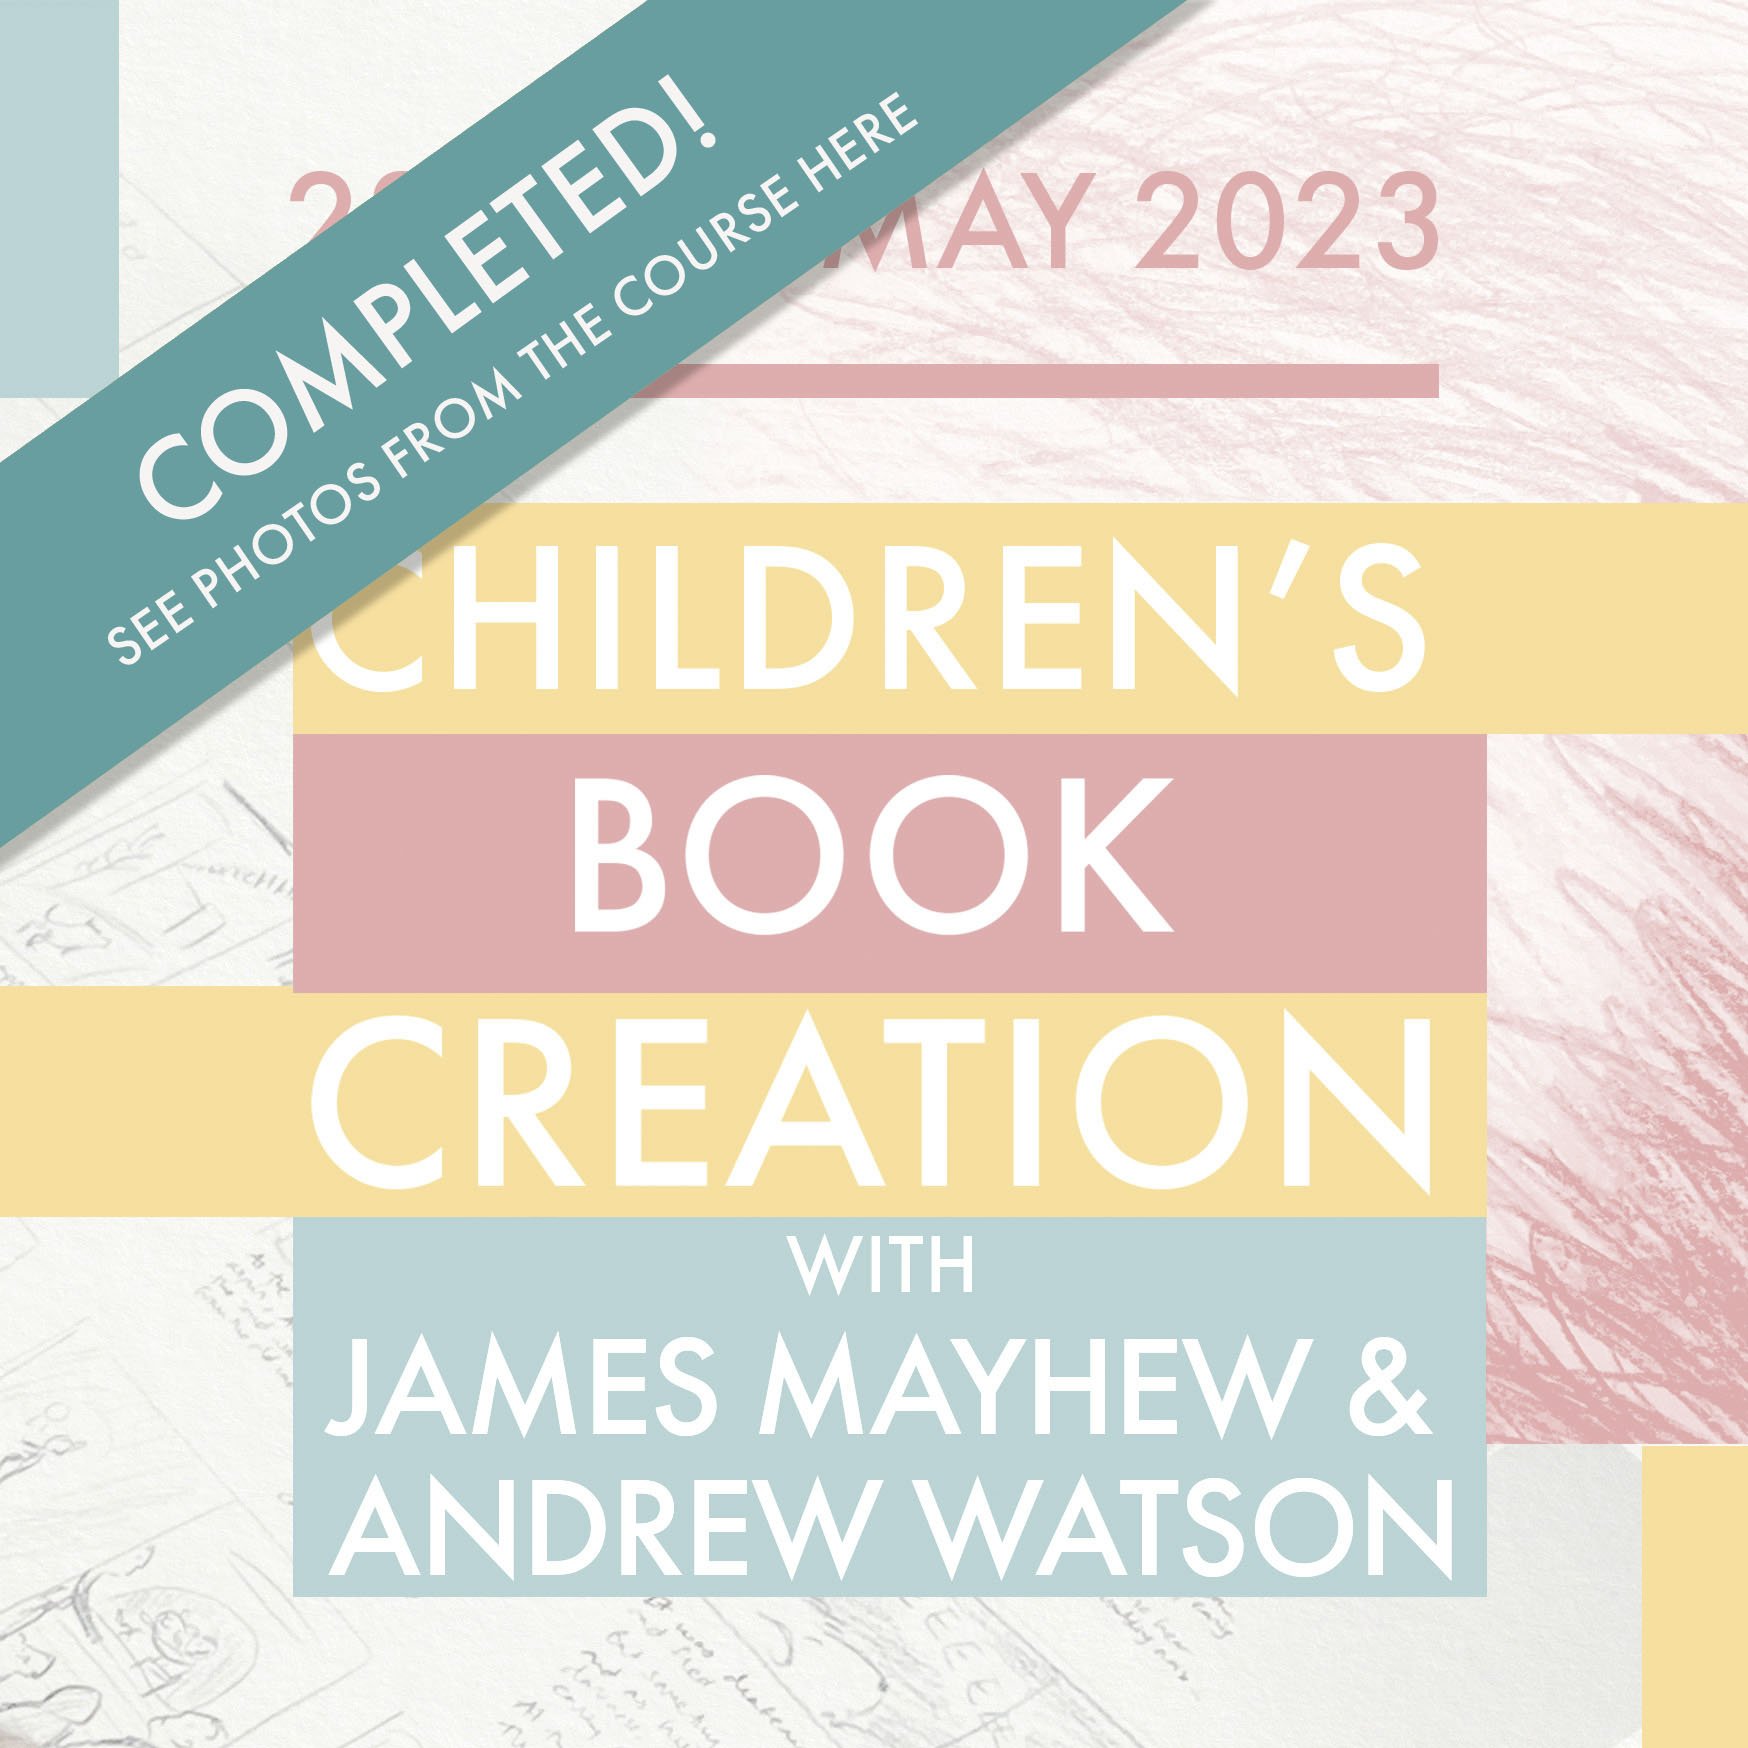 GC chldrens book creation 2023 completed.jpg